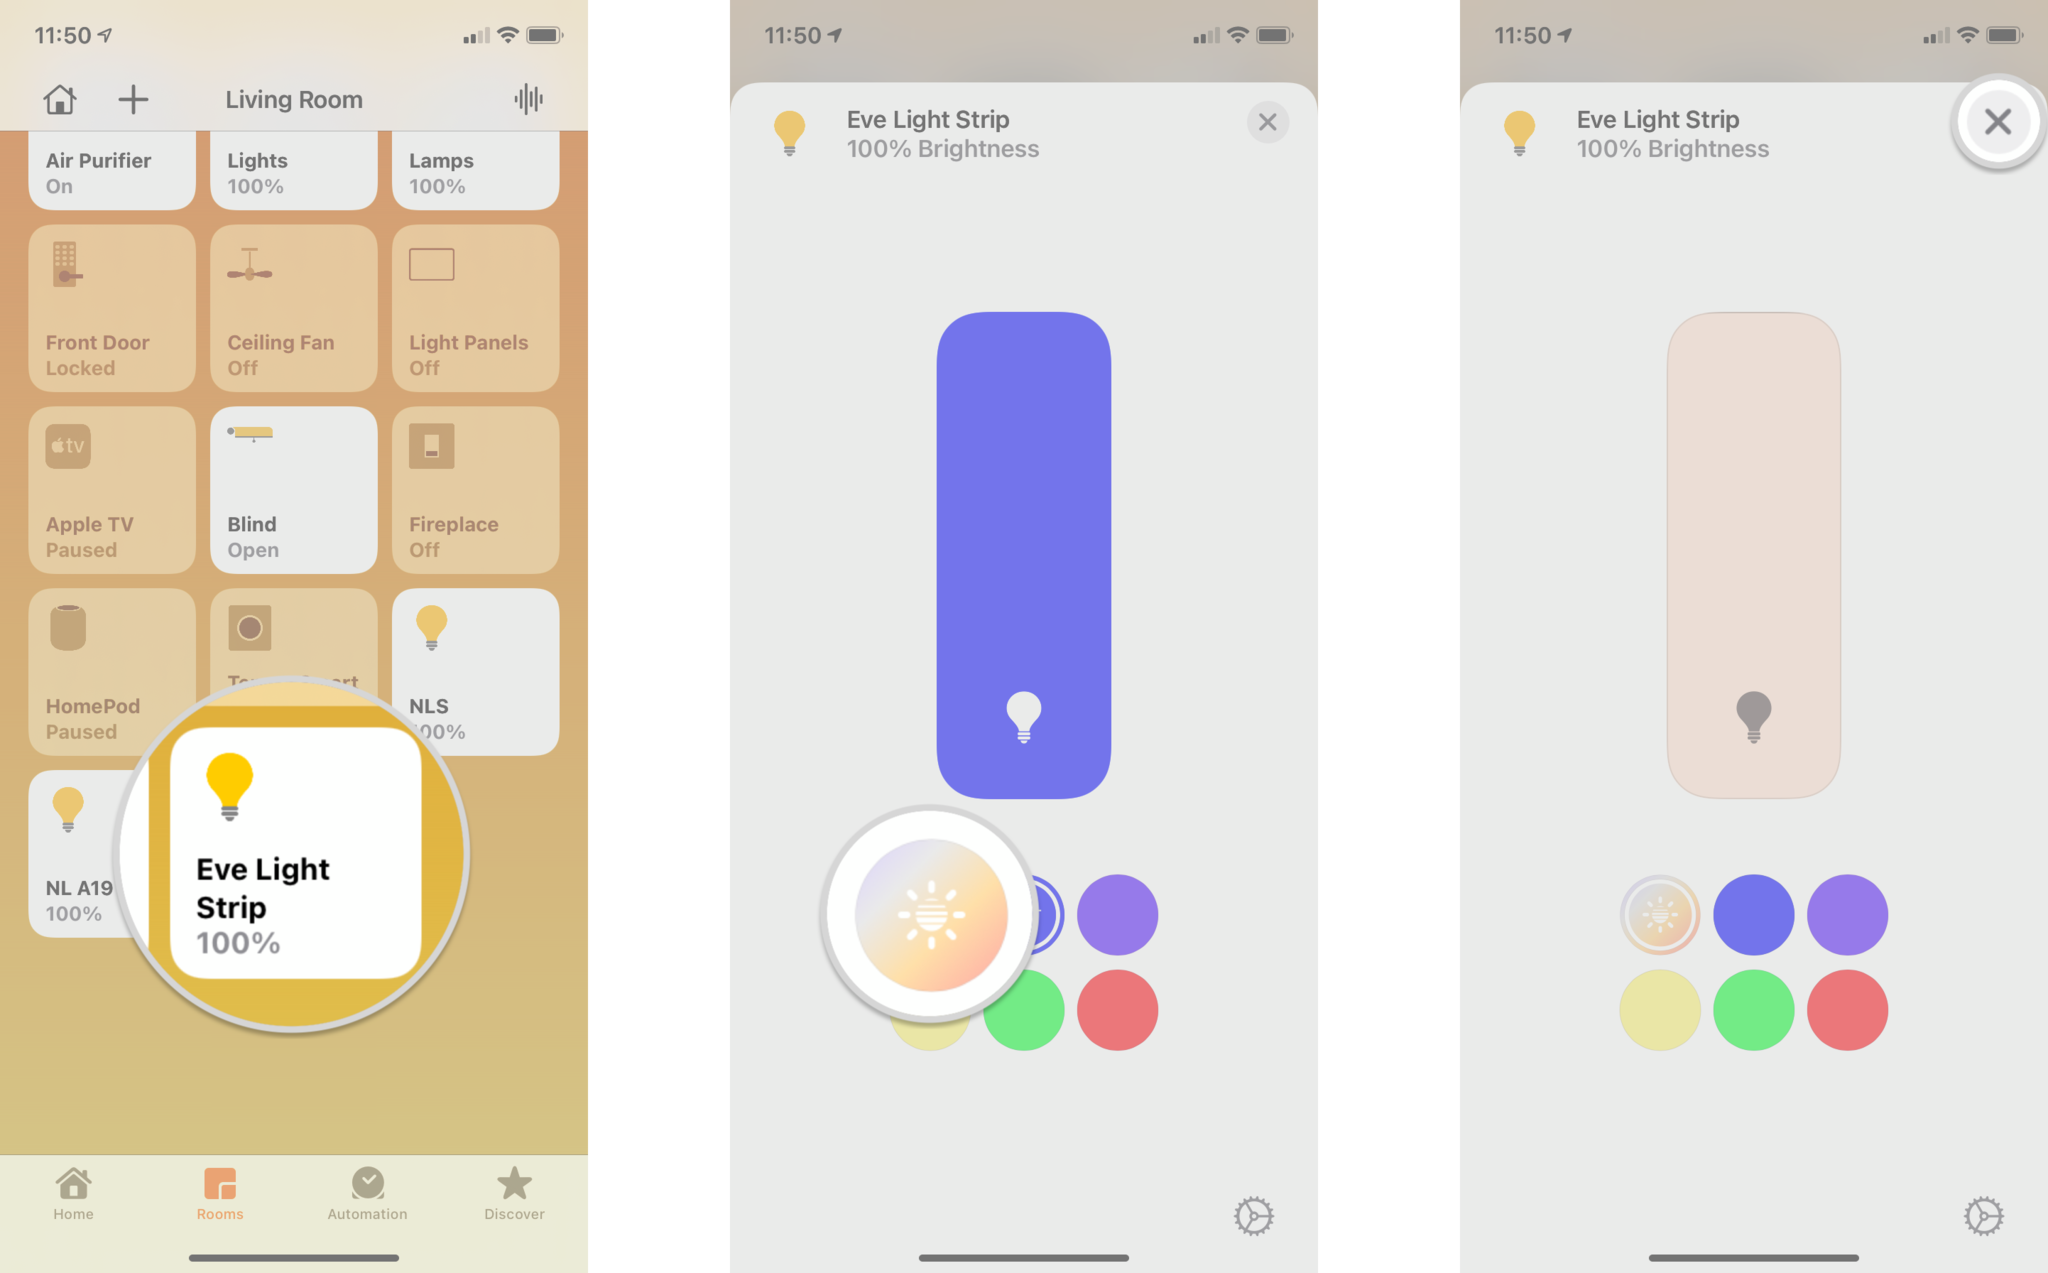 How to use Adaptive Lighting with your HomeKit-enabled lights in the Home app on the iPhone by showing steps: Tap and hold on your Light, Tap the Adaptive Lighting icon, Tap the X button to save